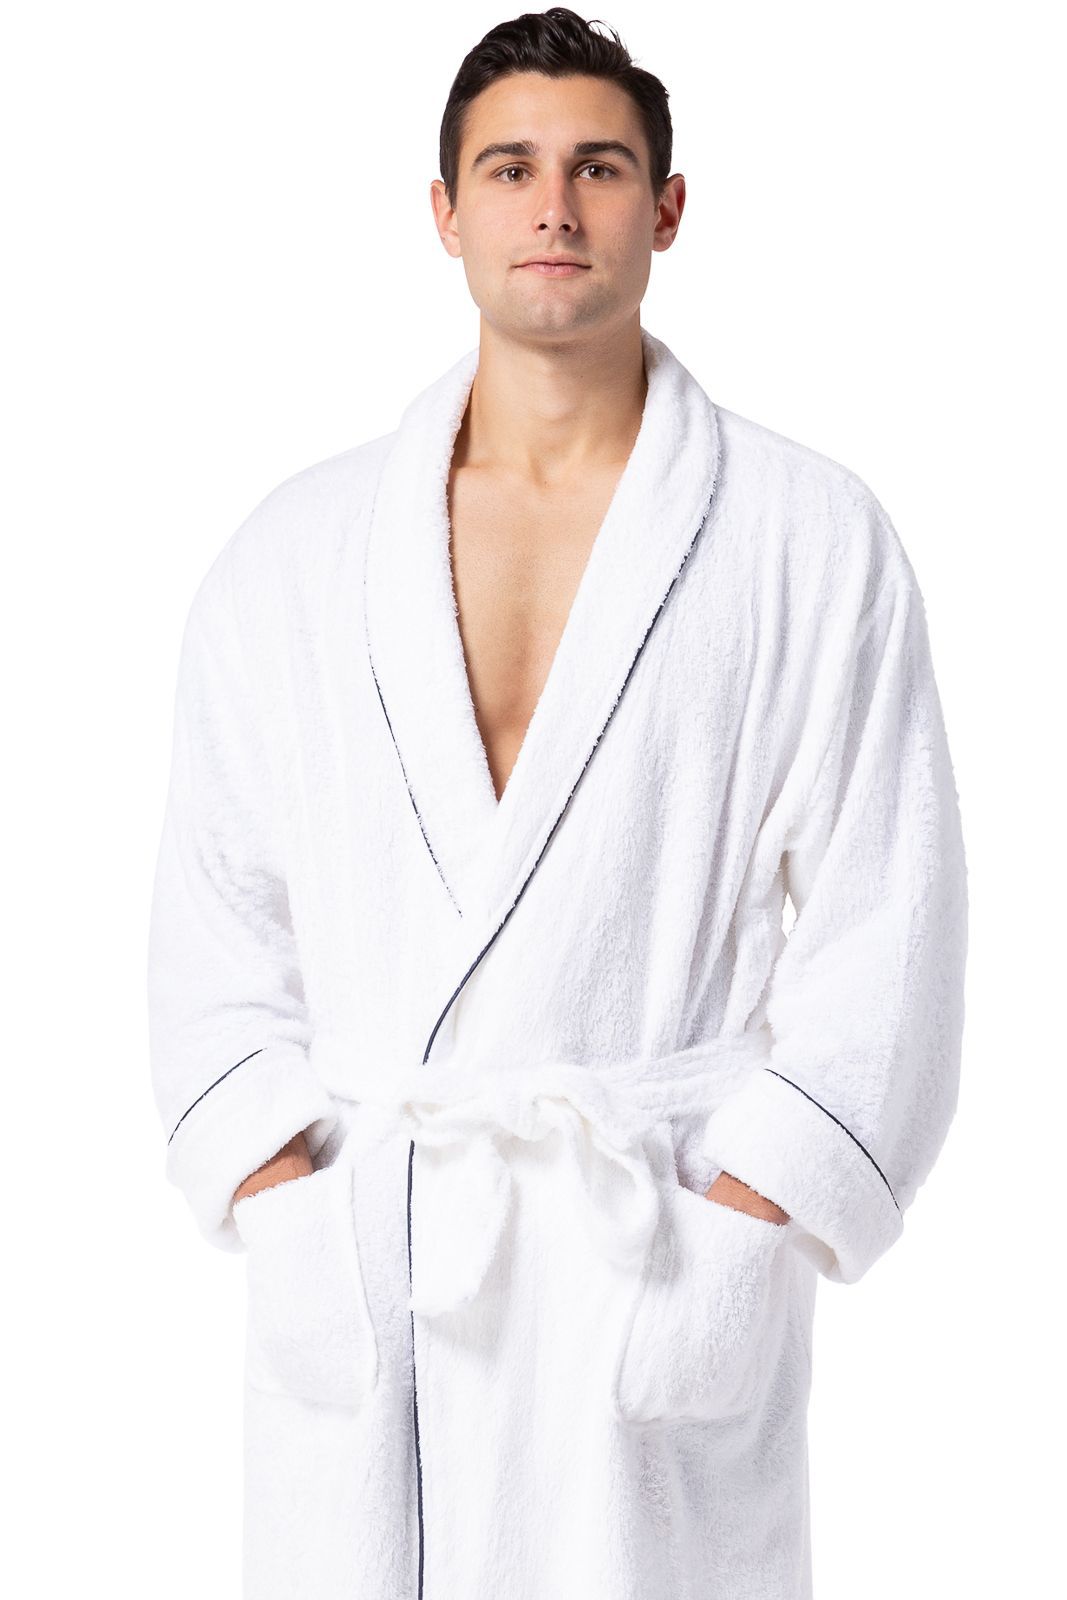 Fishers Finery Mens white terry robe features a quilted design, front pockets, and belt—the perfect robe for after the shower or relaxing at home 